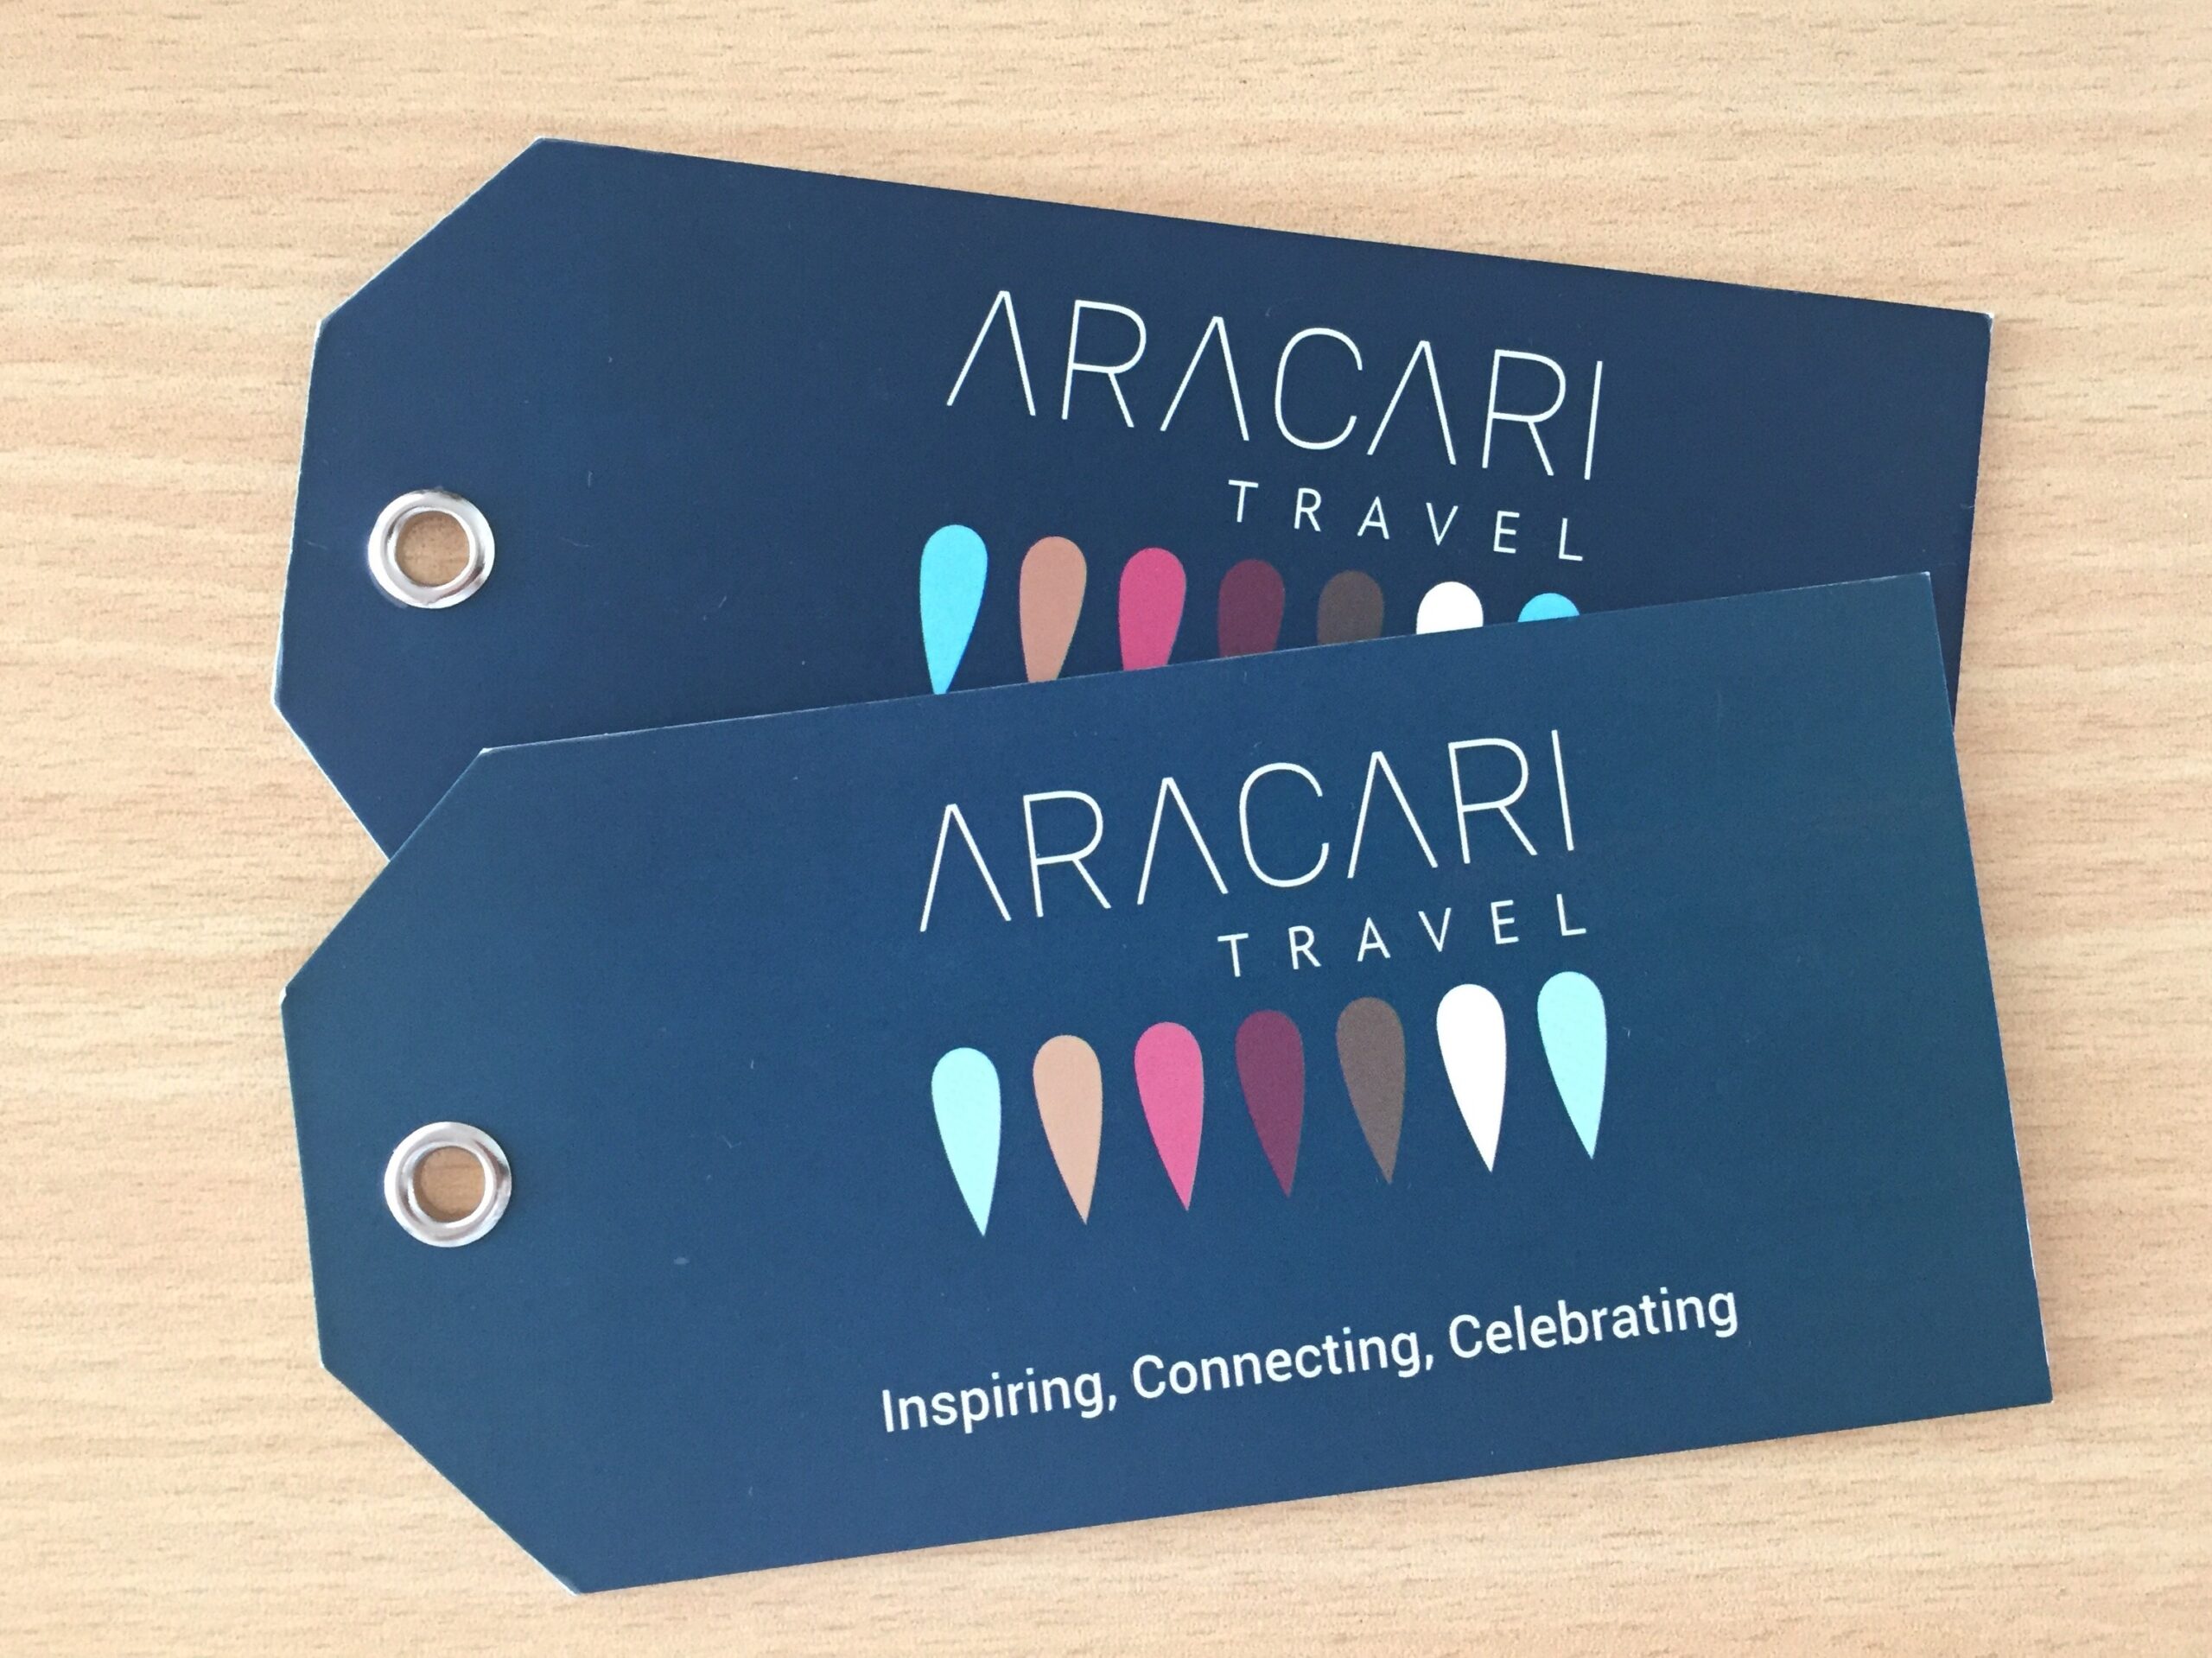 New Welcome Package for Guests, Aracari Travel